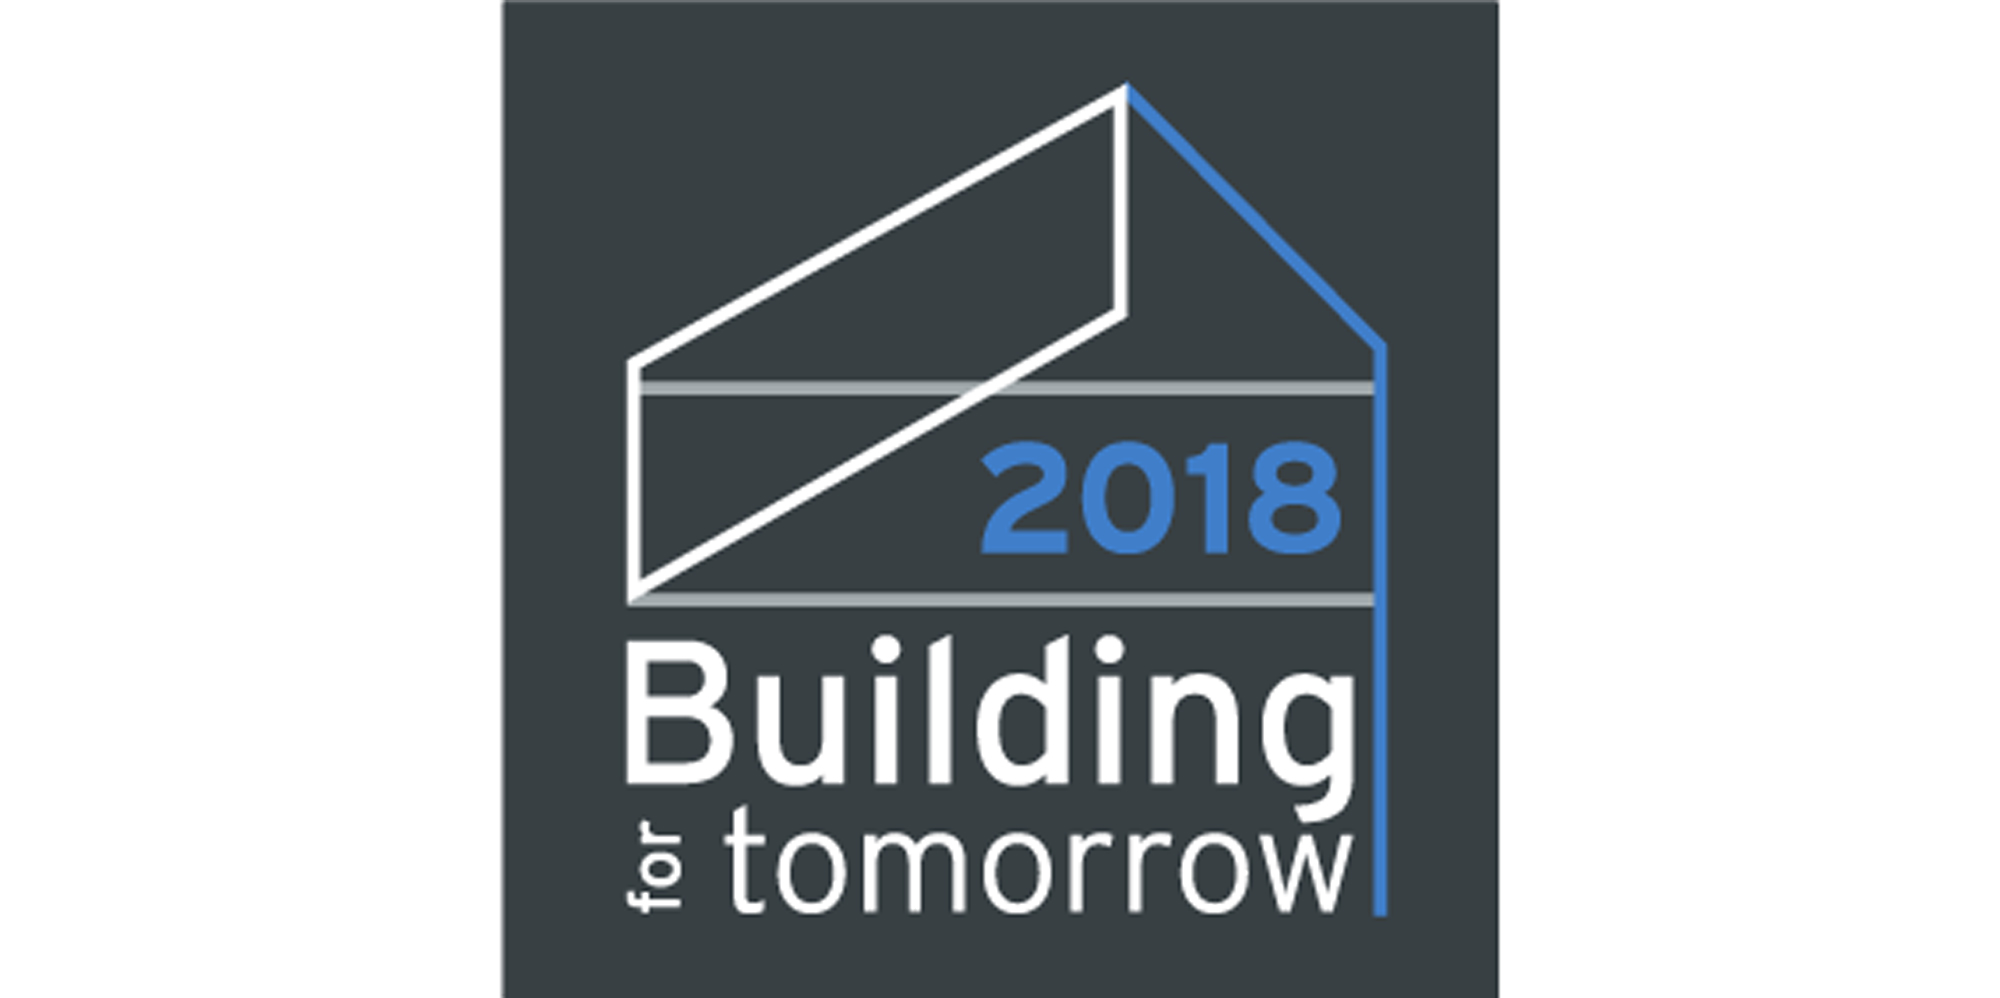 Skills and Quality to be key themes for NHBC’s Building for tomorrow 2018 roadshows